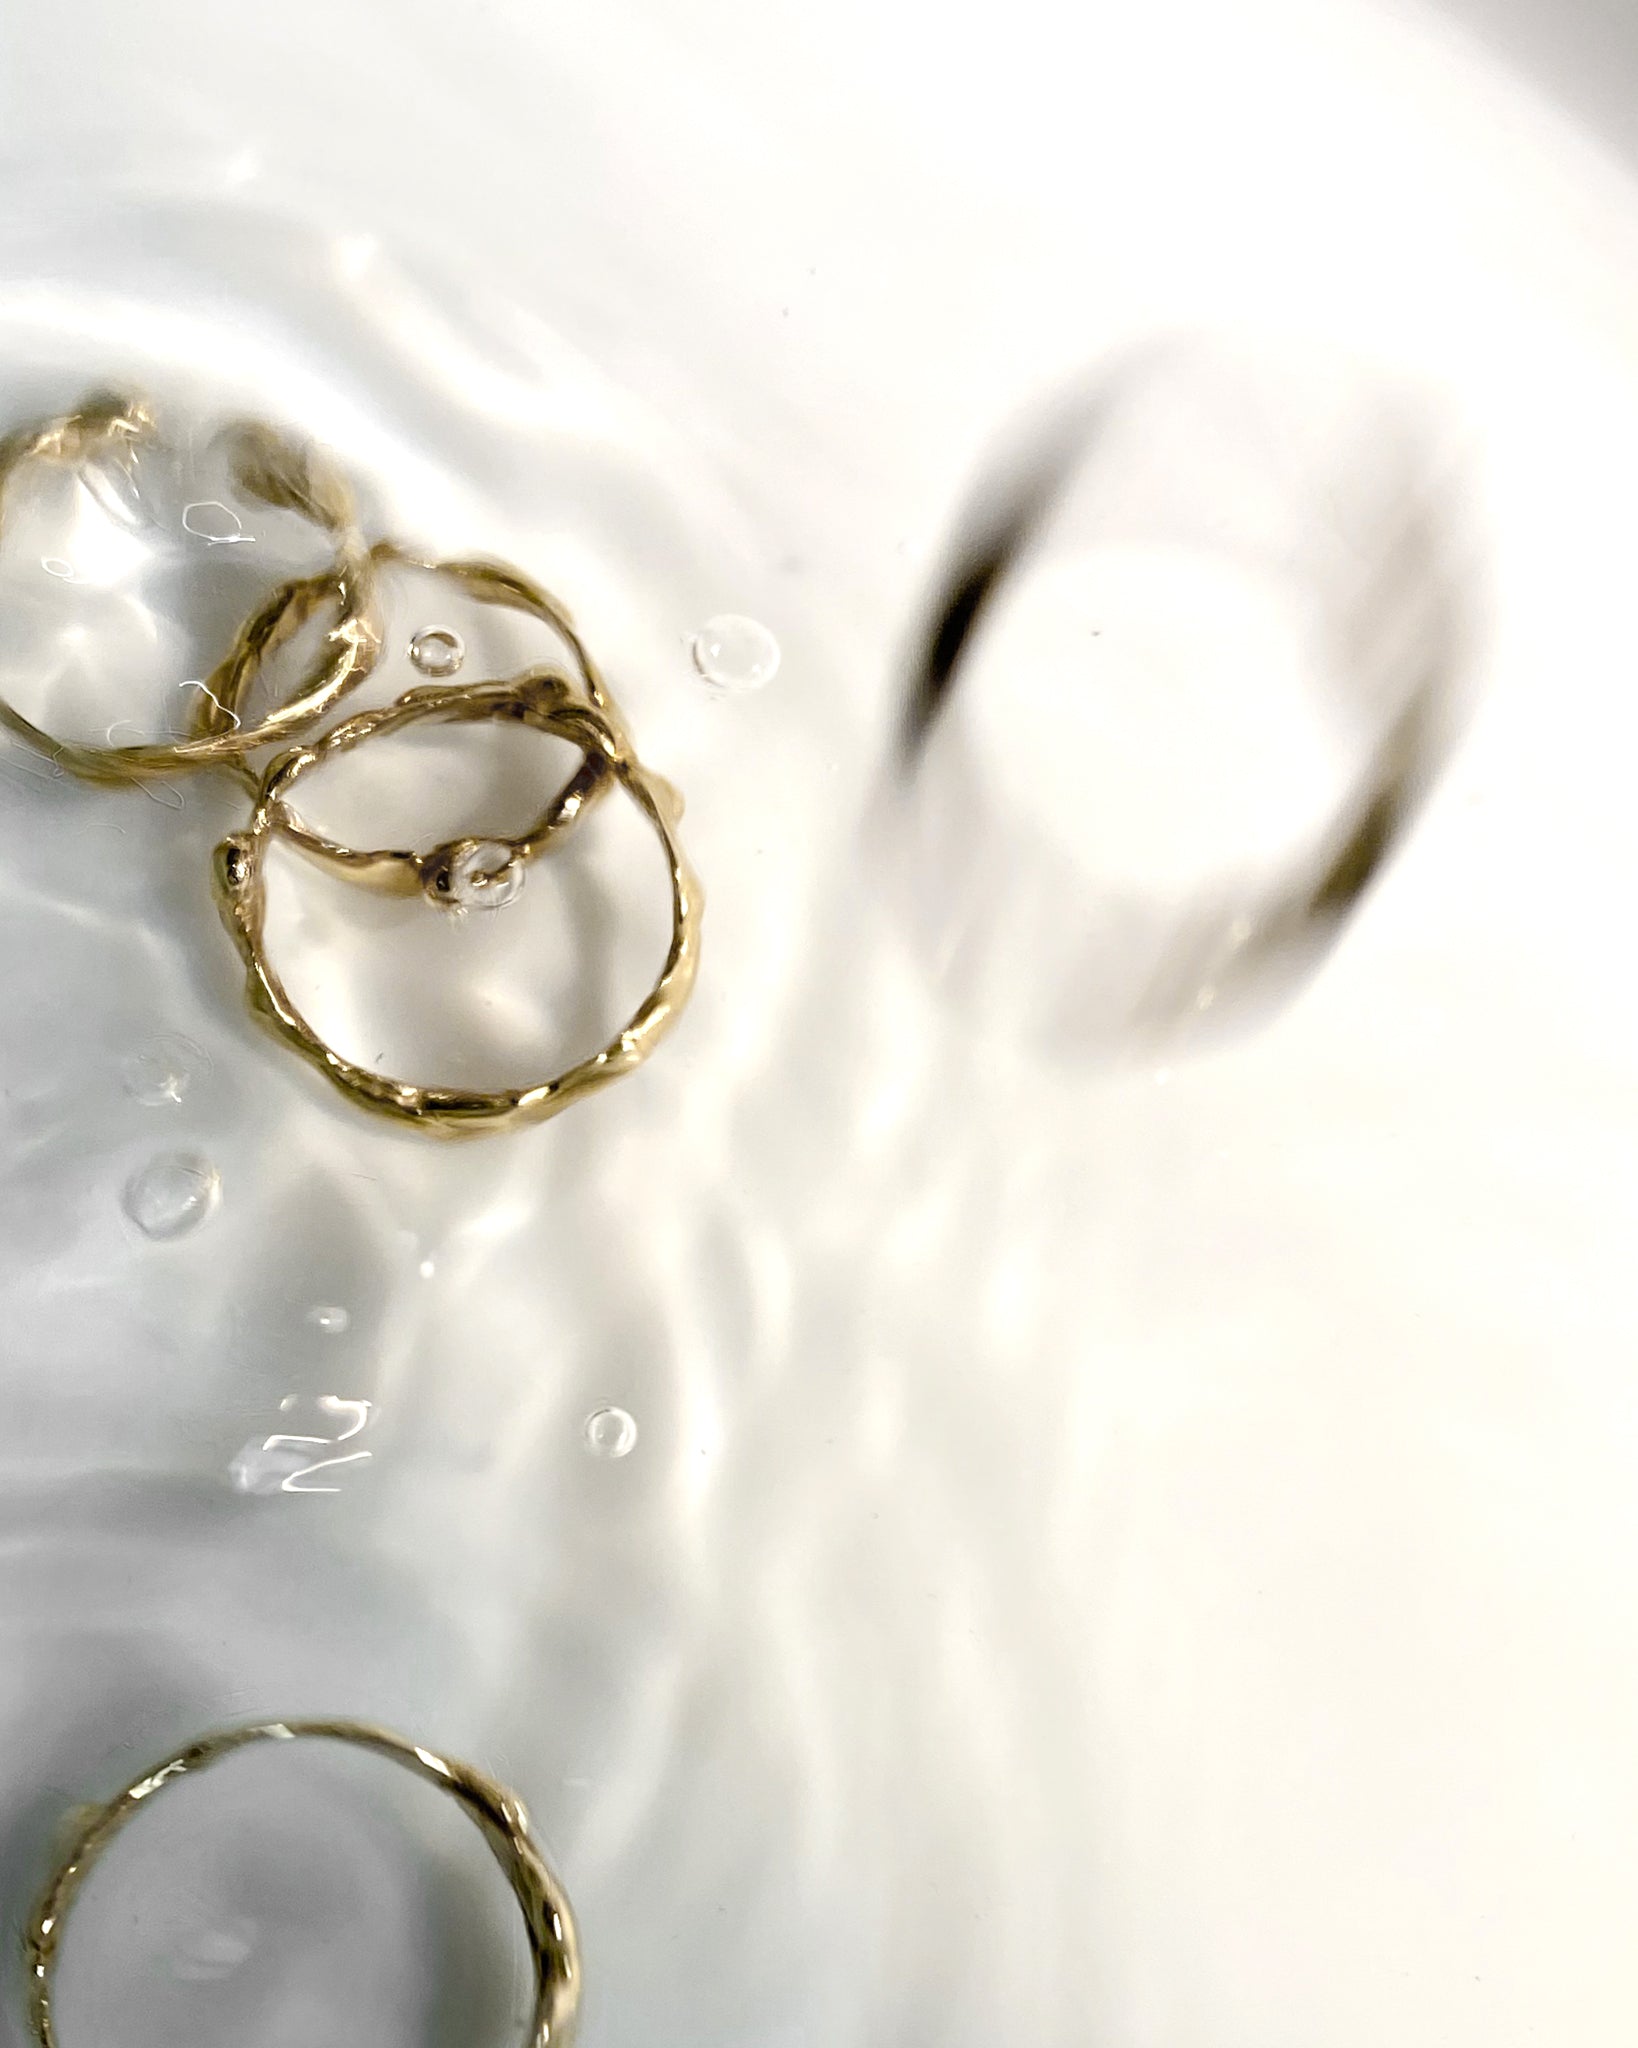 5 gold molten rings falling into water